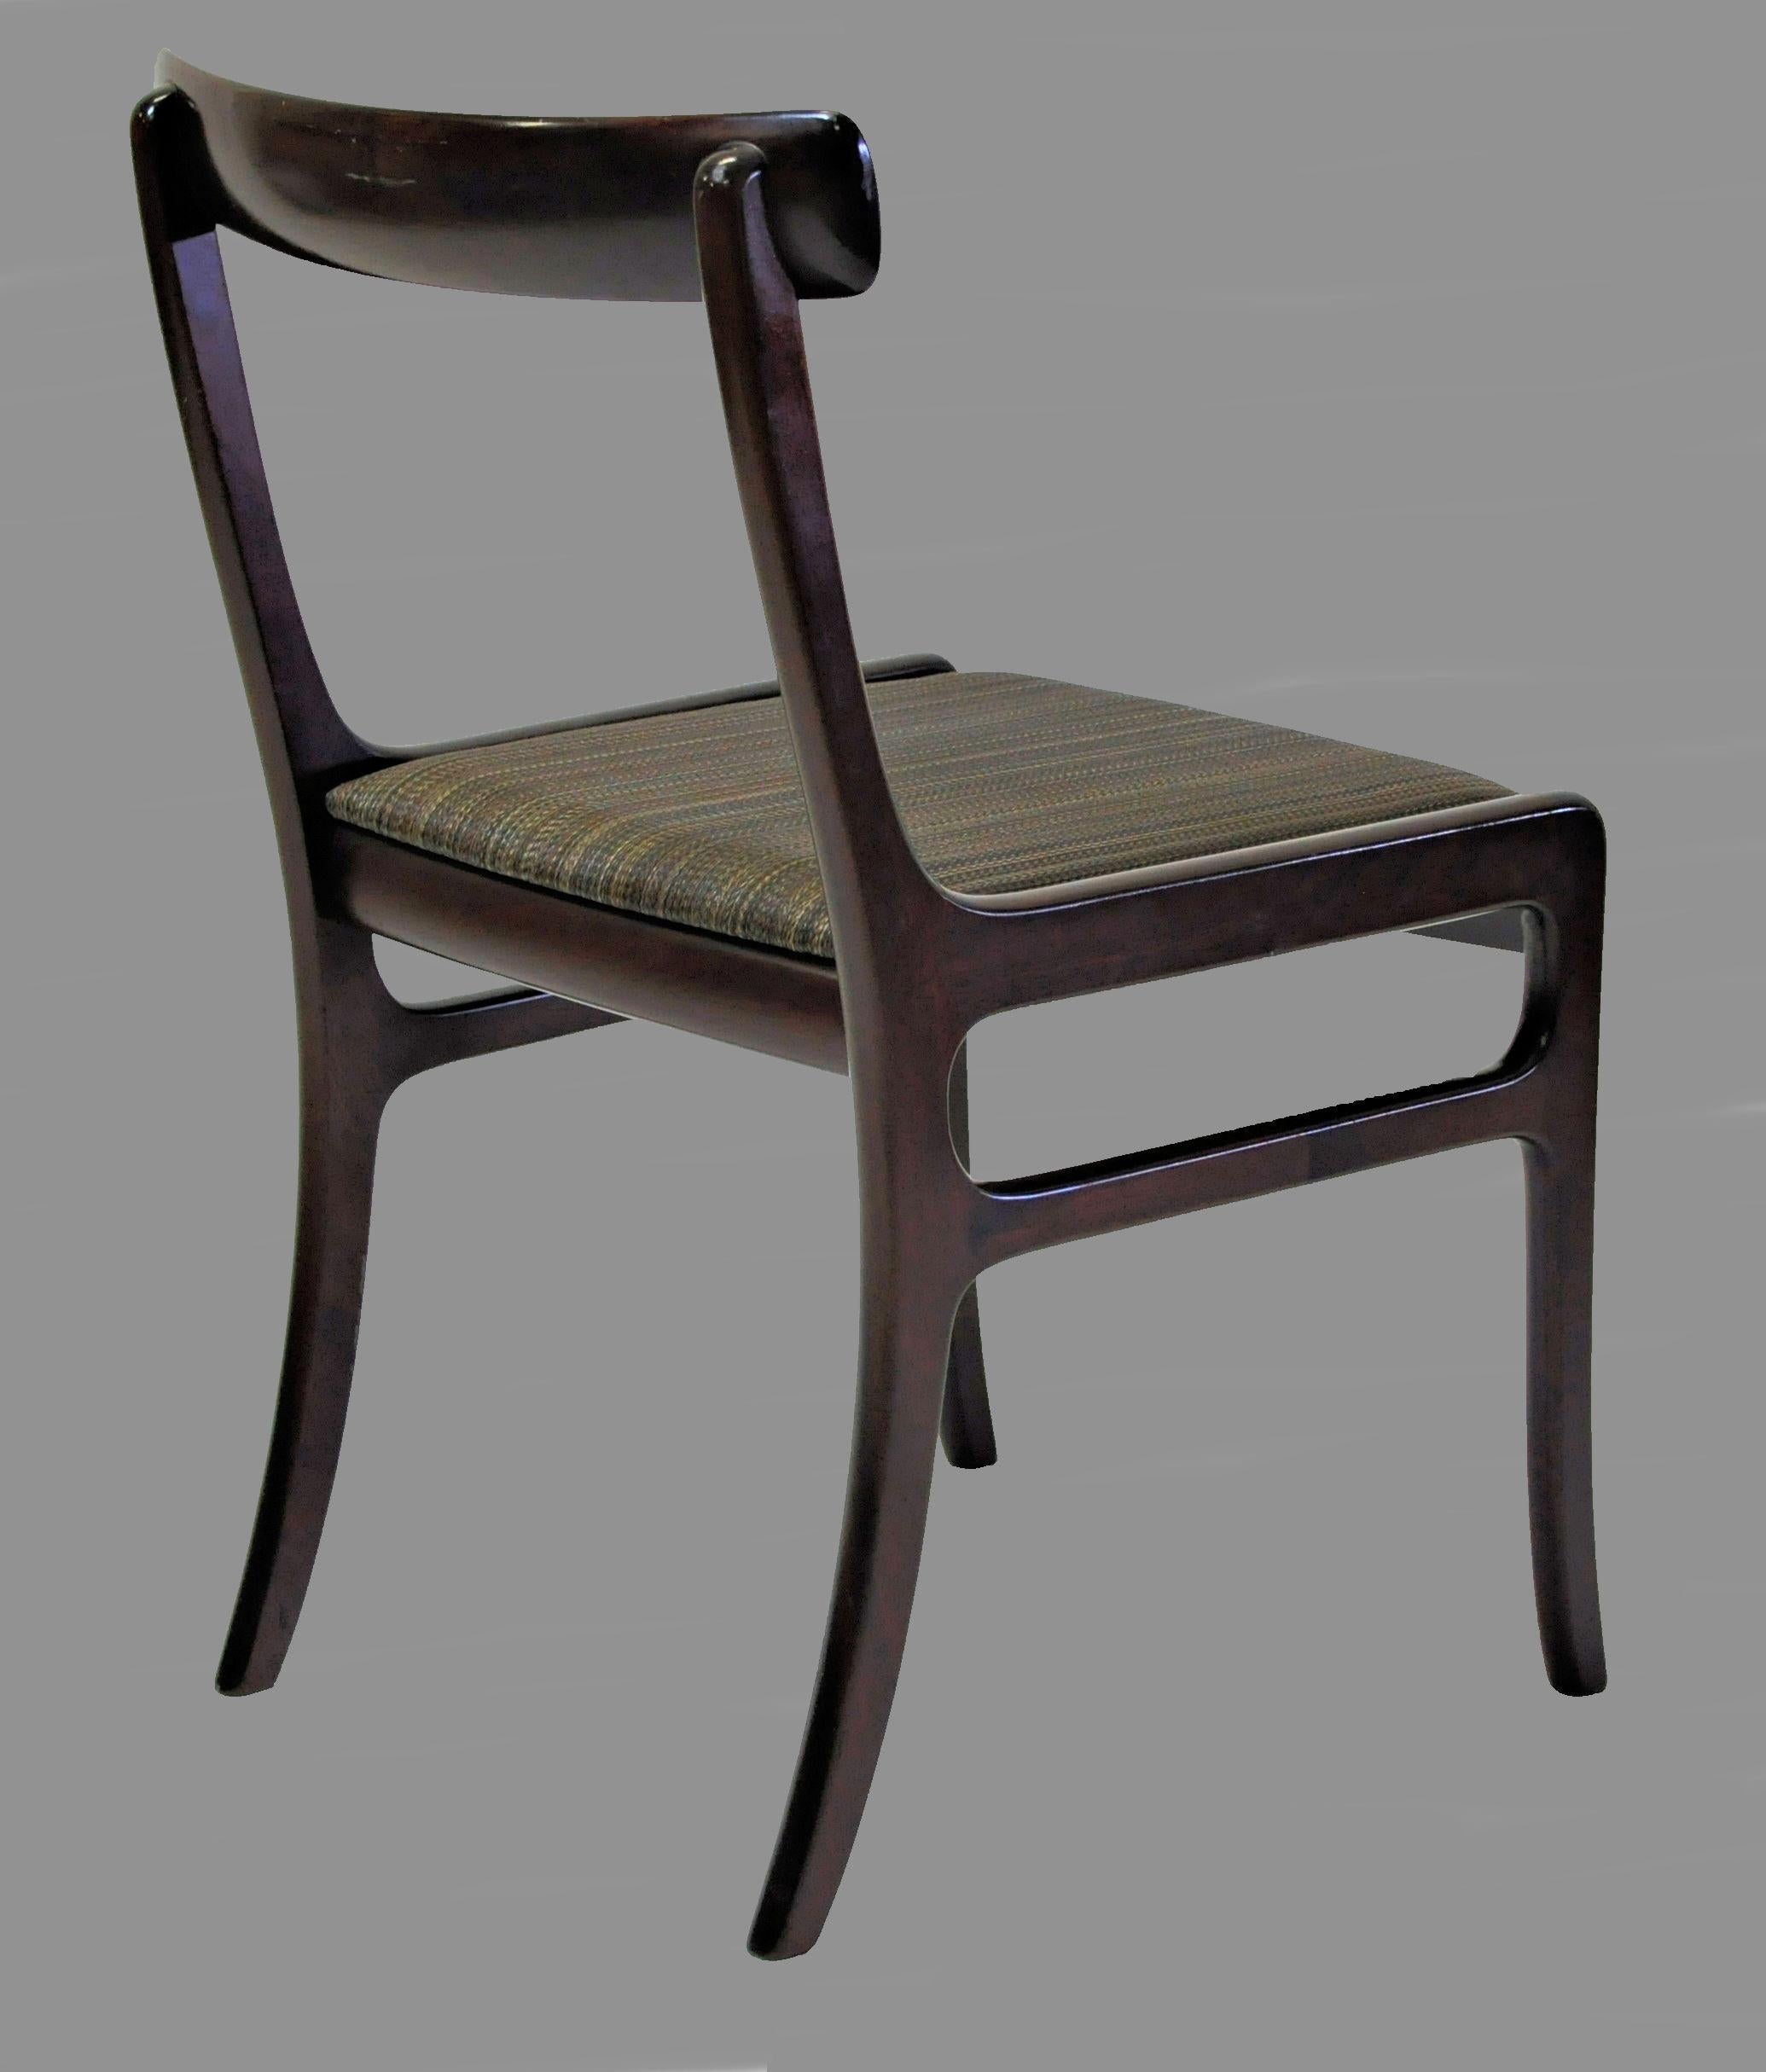 Ole Wanscher set of Six Refinished Mahogany Dining Chairs, Custom Upholstery In Good Condition For Sale In Knebel, DK